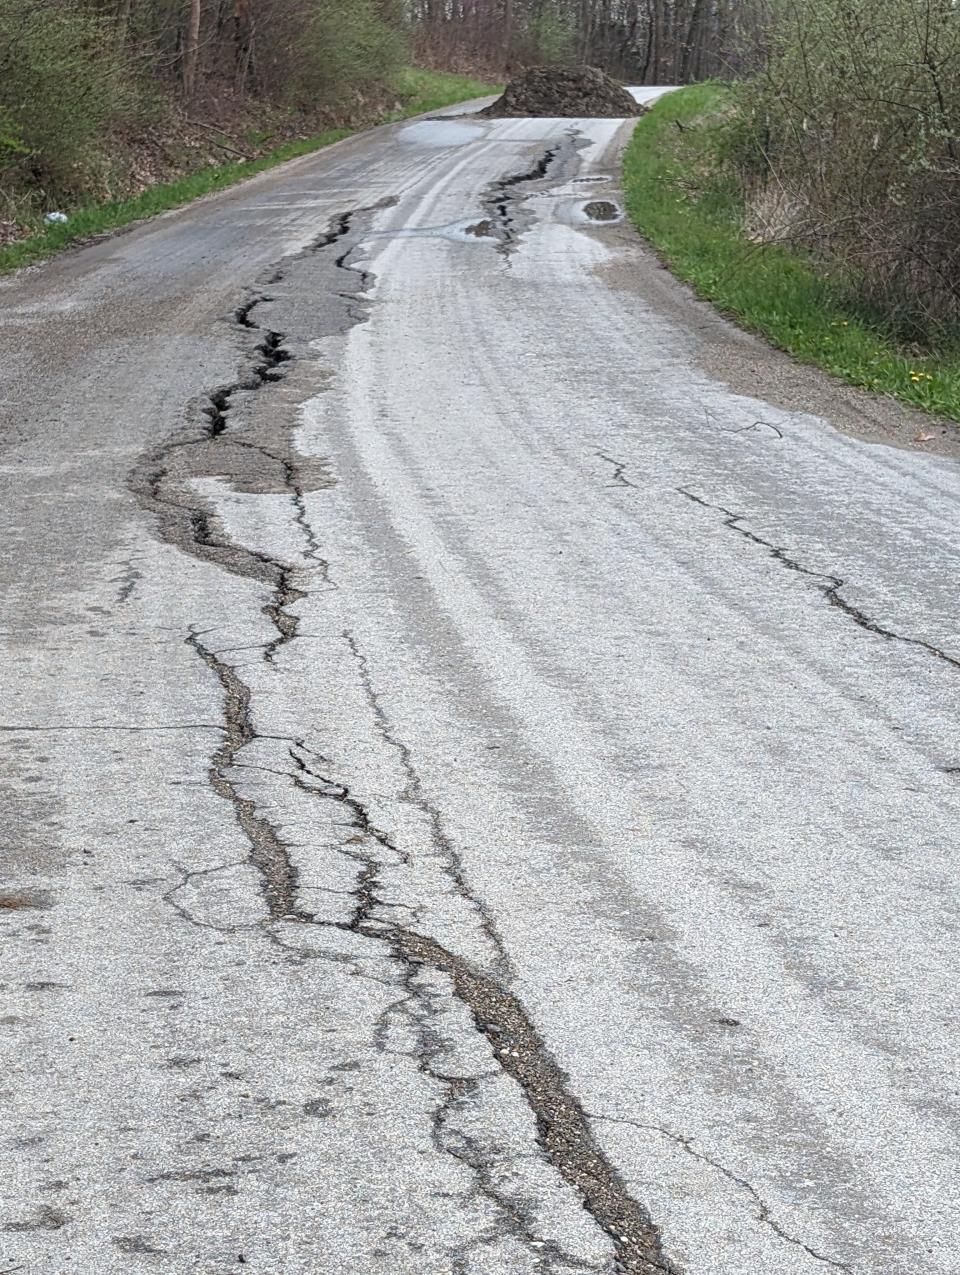 Rose Hill Road is the worst of 22 slips that occurred in Guernsey County due to the heavy April rains. Rose Hill is closed until further notice.